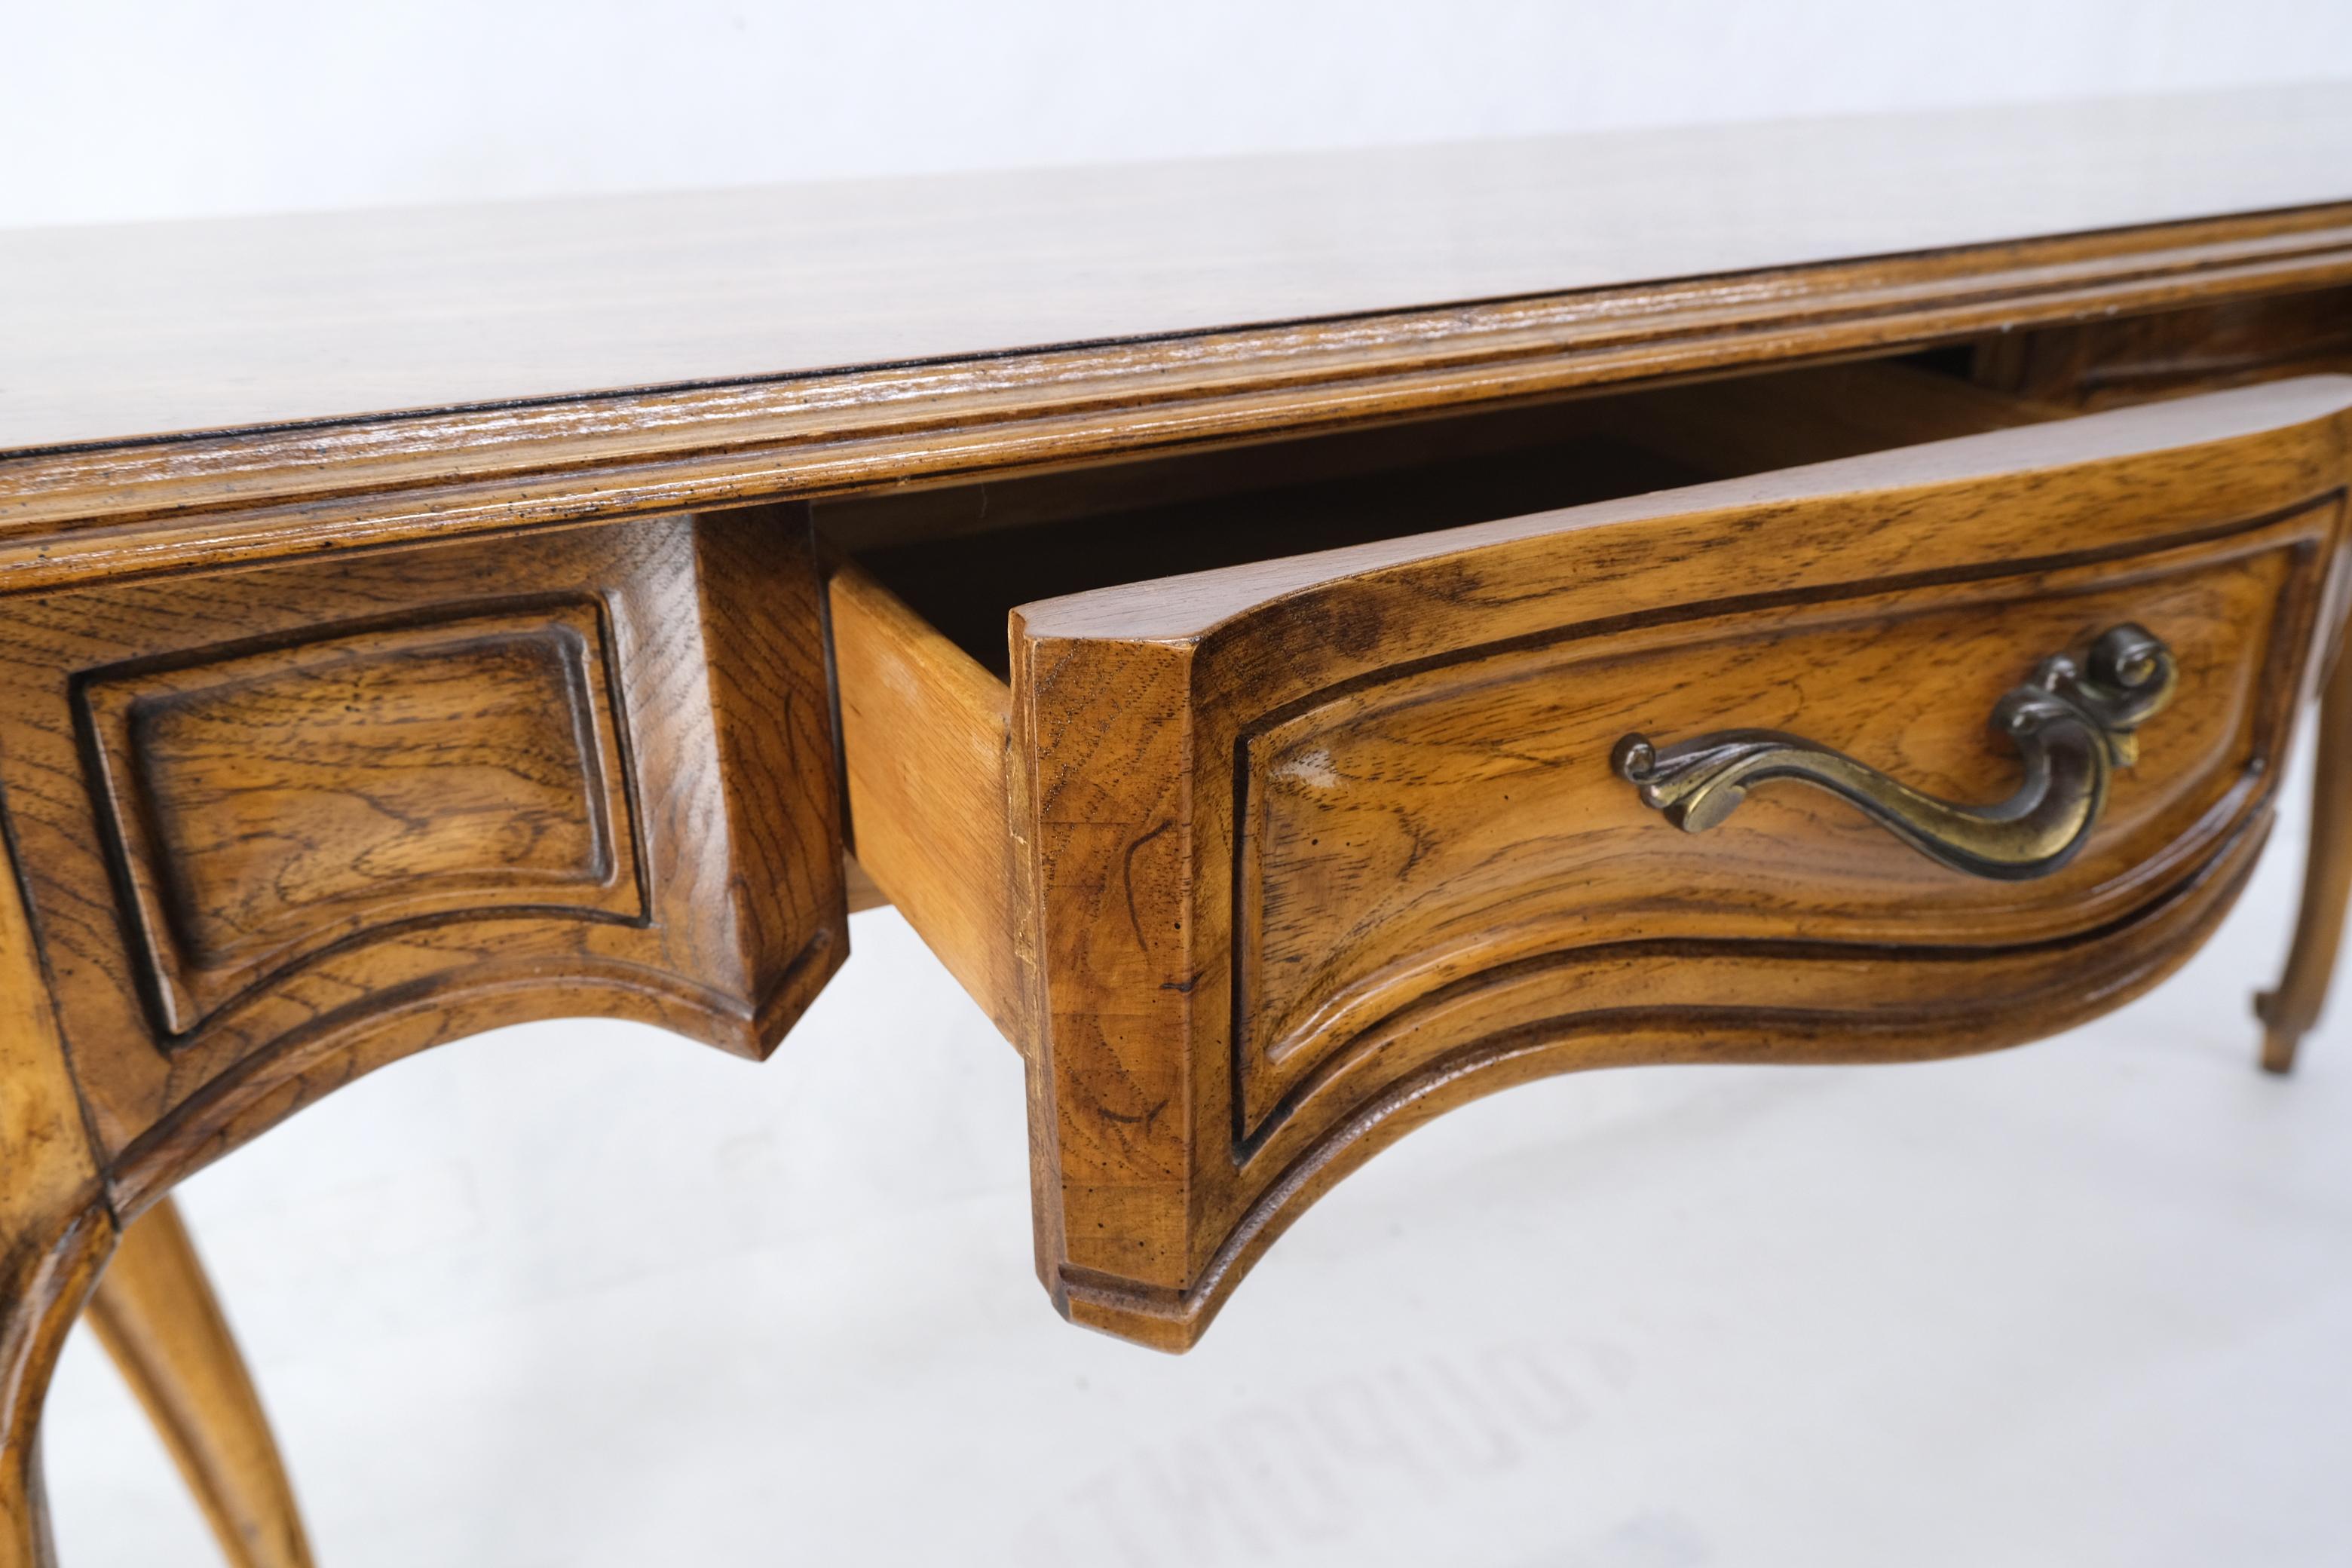 Carved serpentine front 2 drawers cabriole leg console sofa entry table.